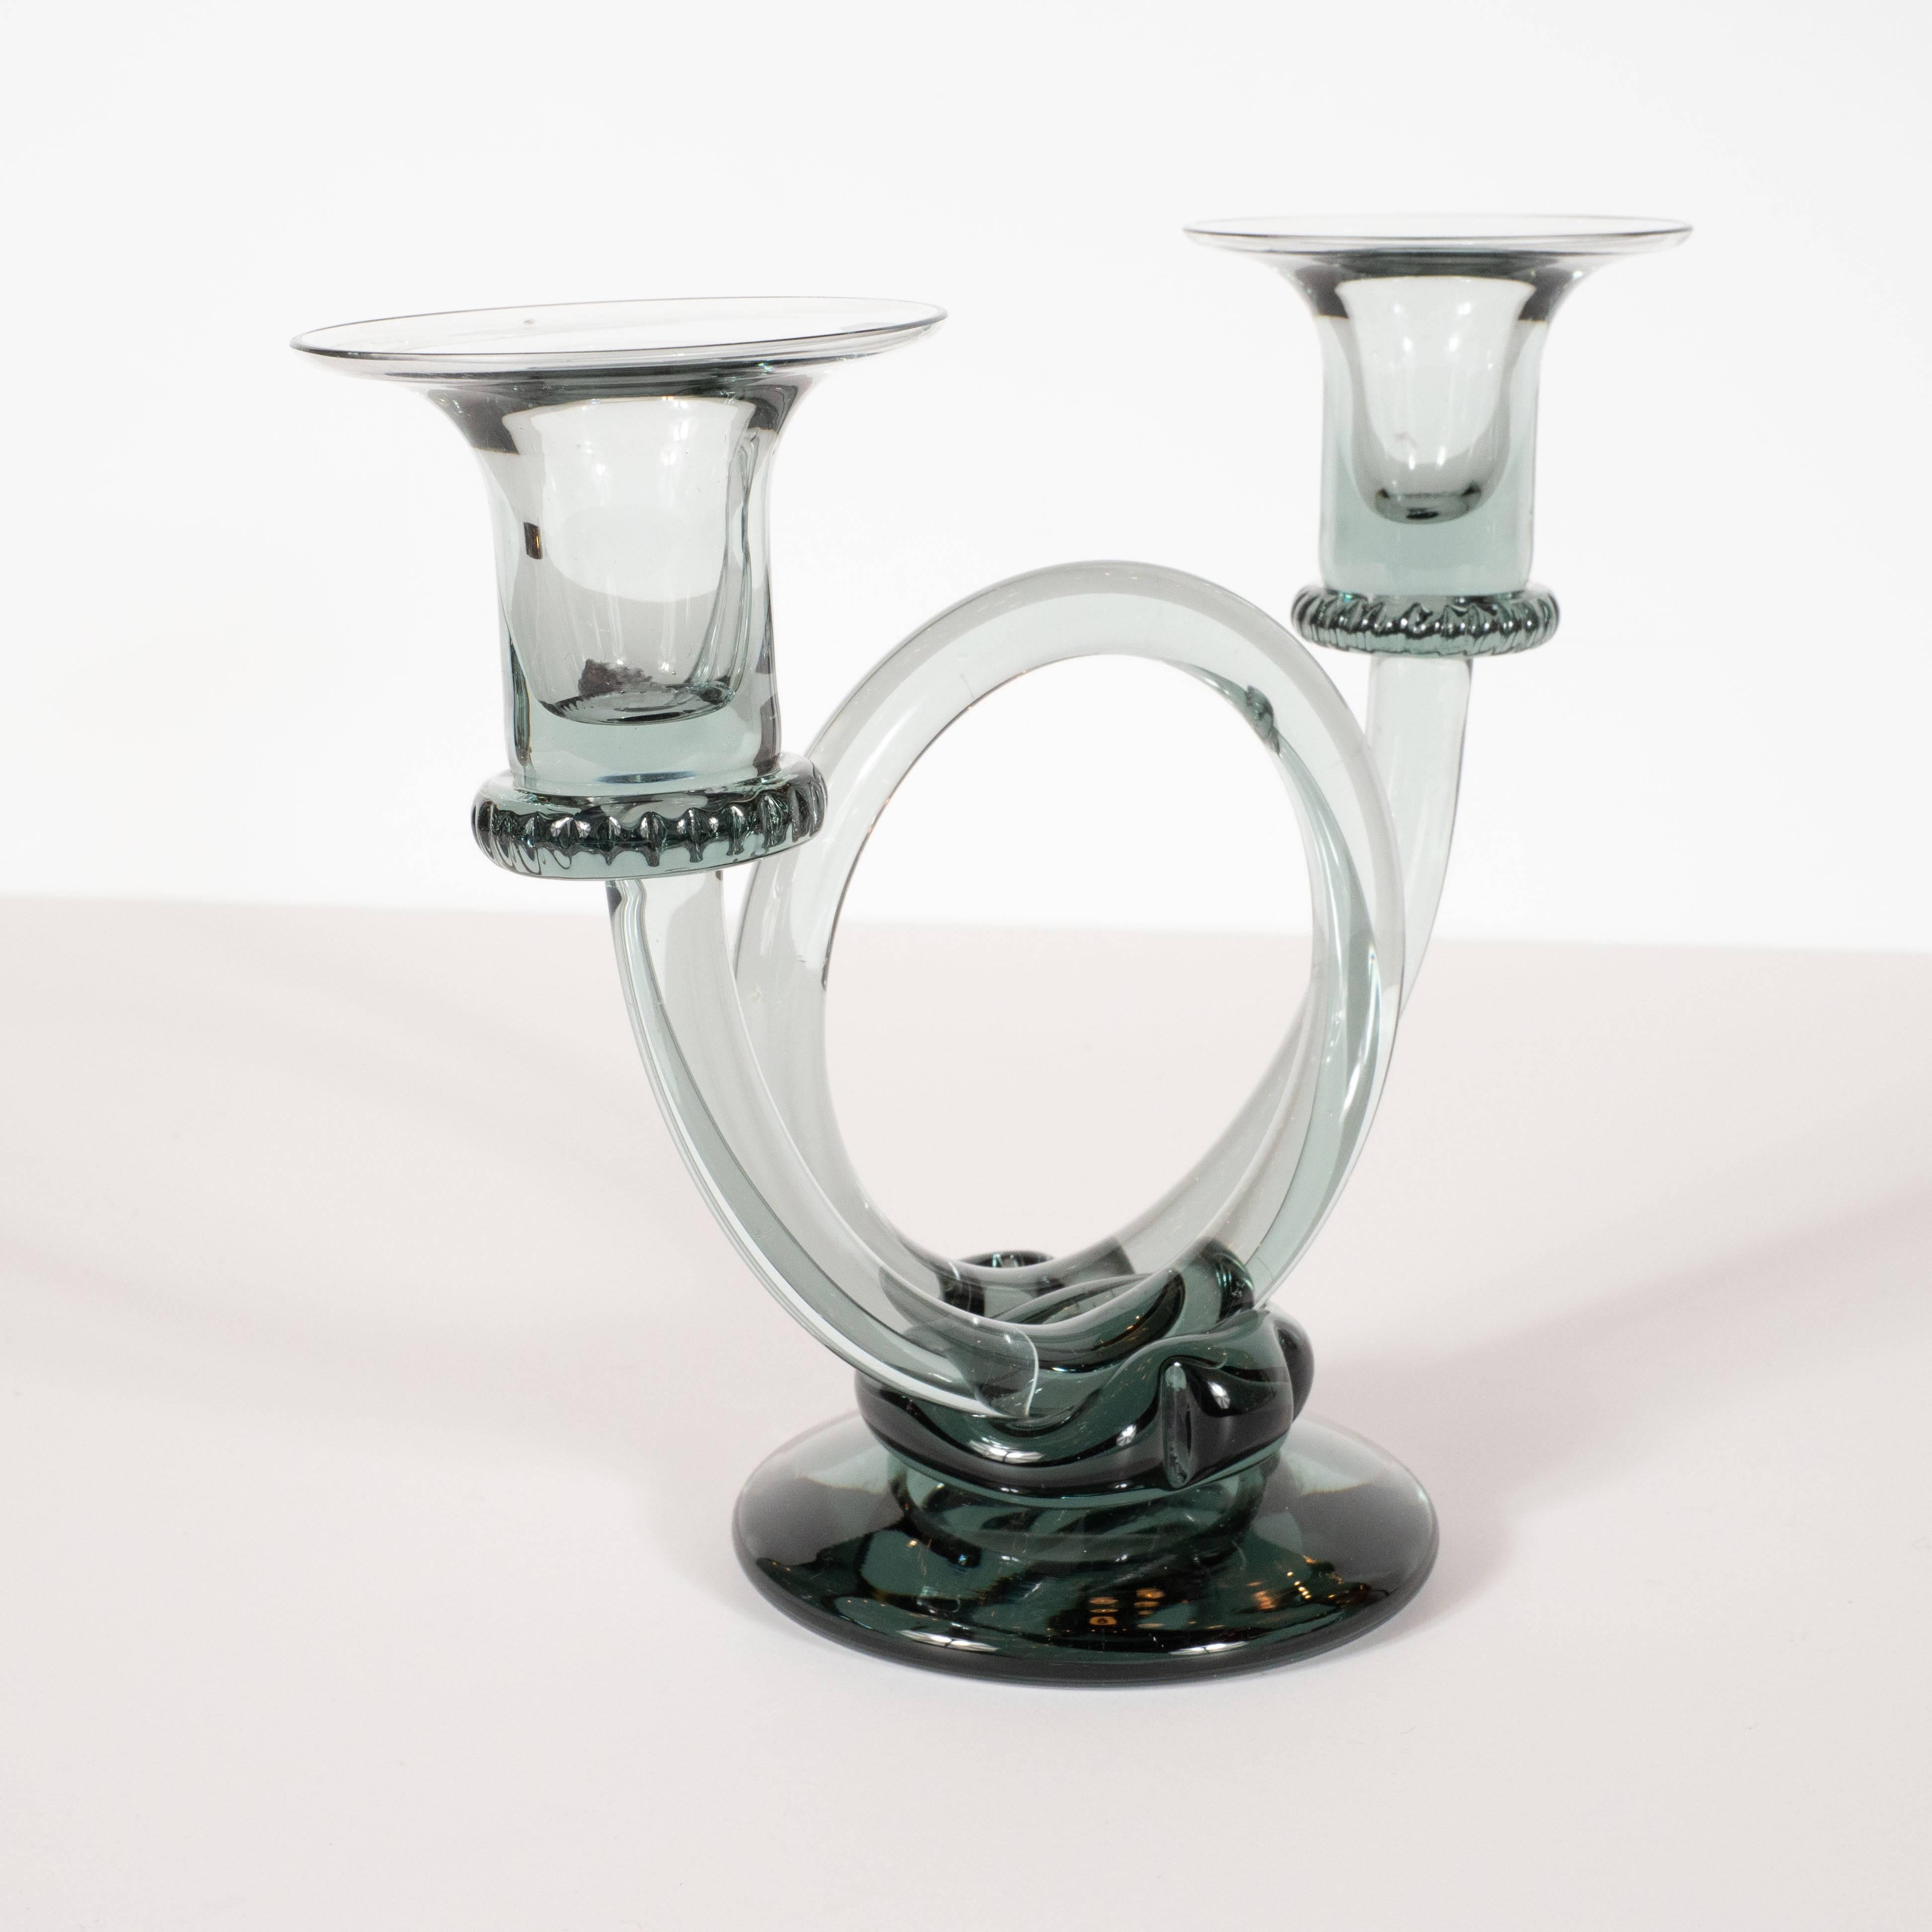 This elegant pair of candlesticks were designed by A.D Copier and handblown by the Royal Leerdam Glassworks in the Netherlands- circa 1950. They feature two trumpet form candlesticks composed of a single curling cylindrical rod that creates a